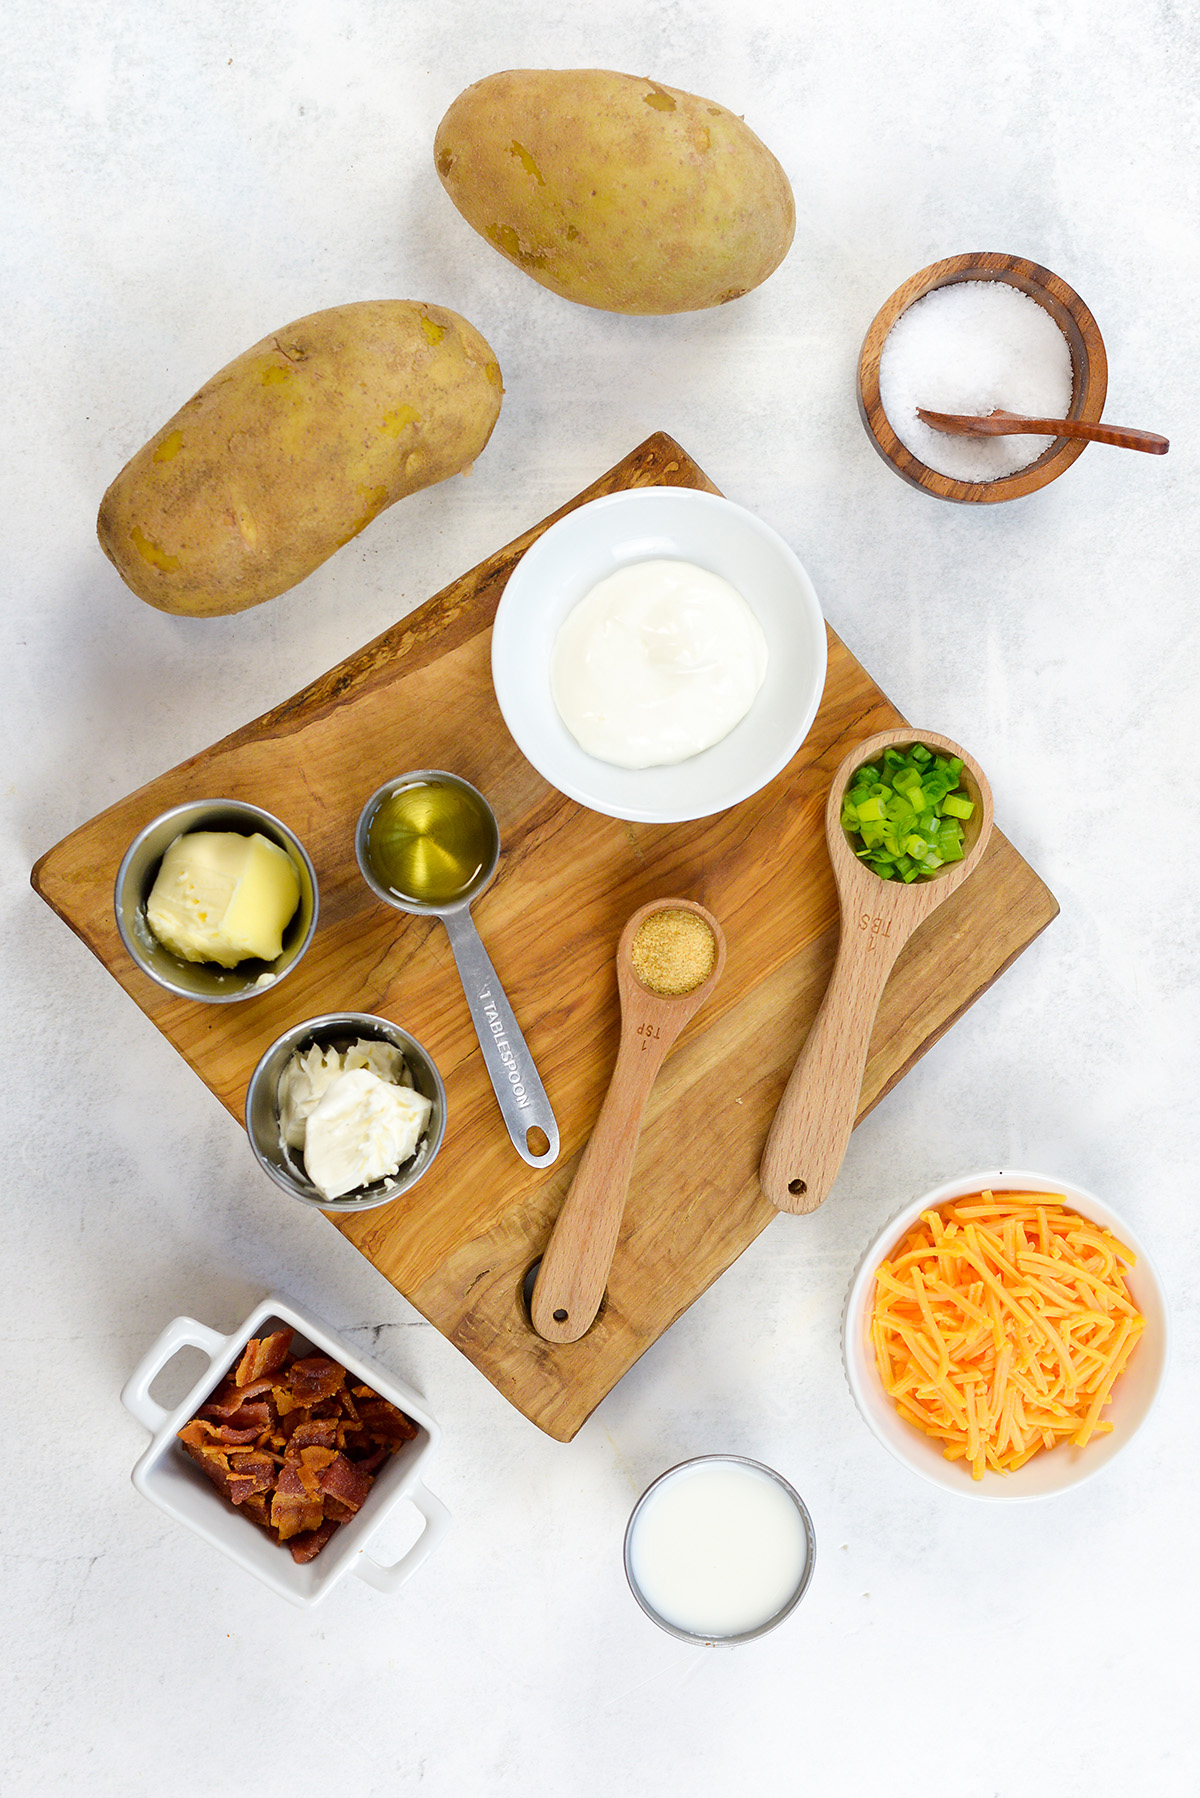 Twice baked potato ingredients on a countertop.